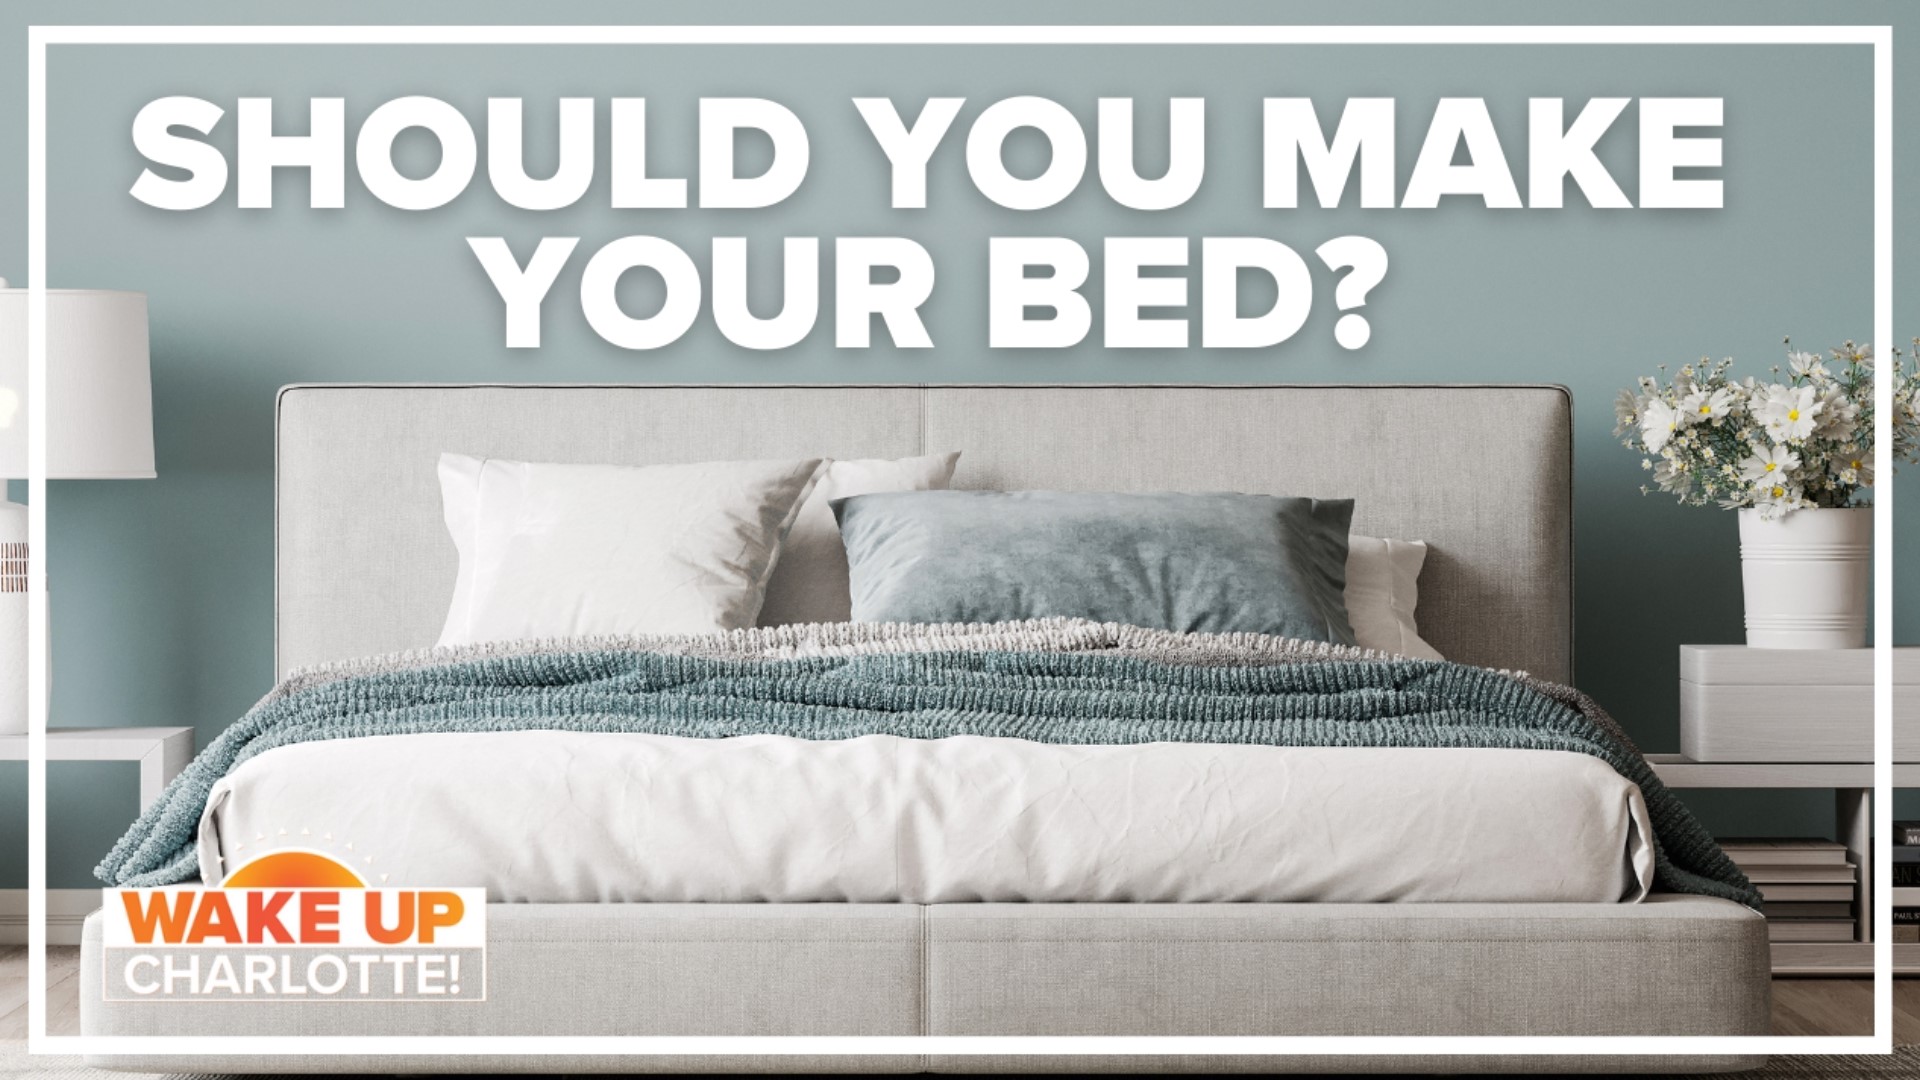 When it comes to the actual science, making your bed right away could have some really gross consequences.